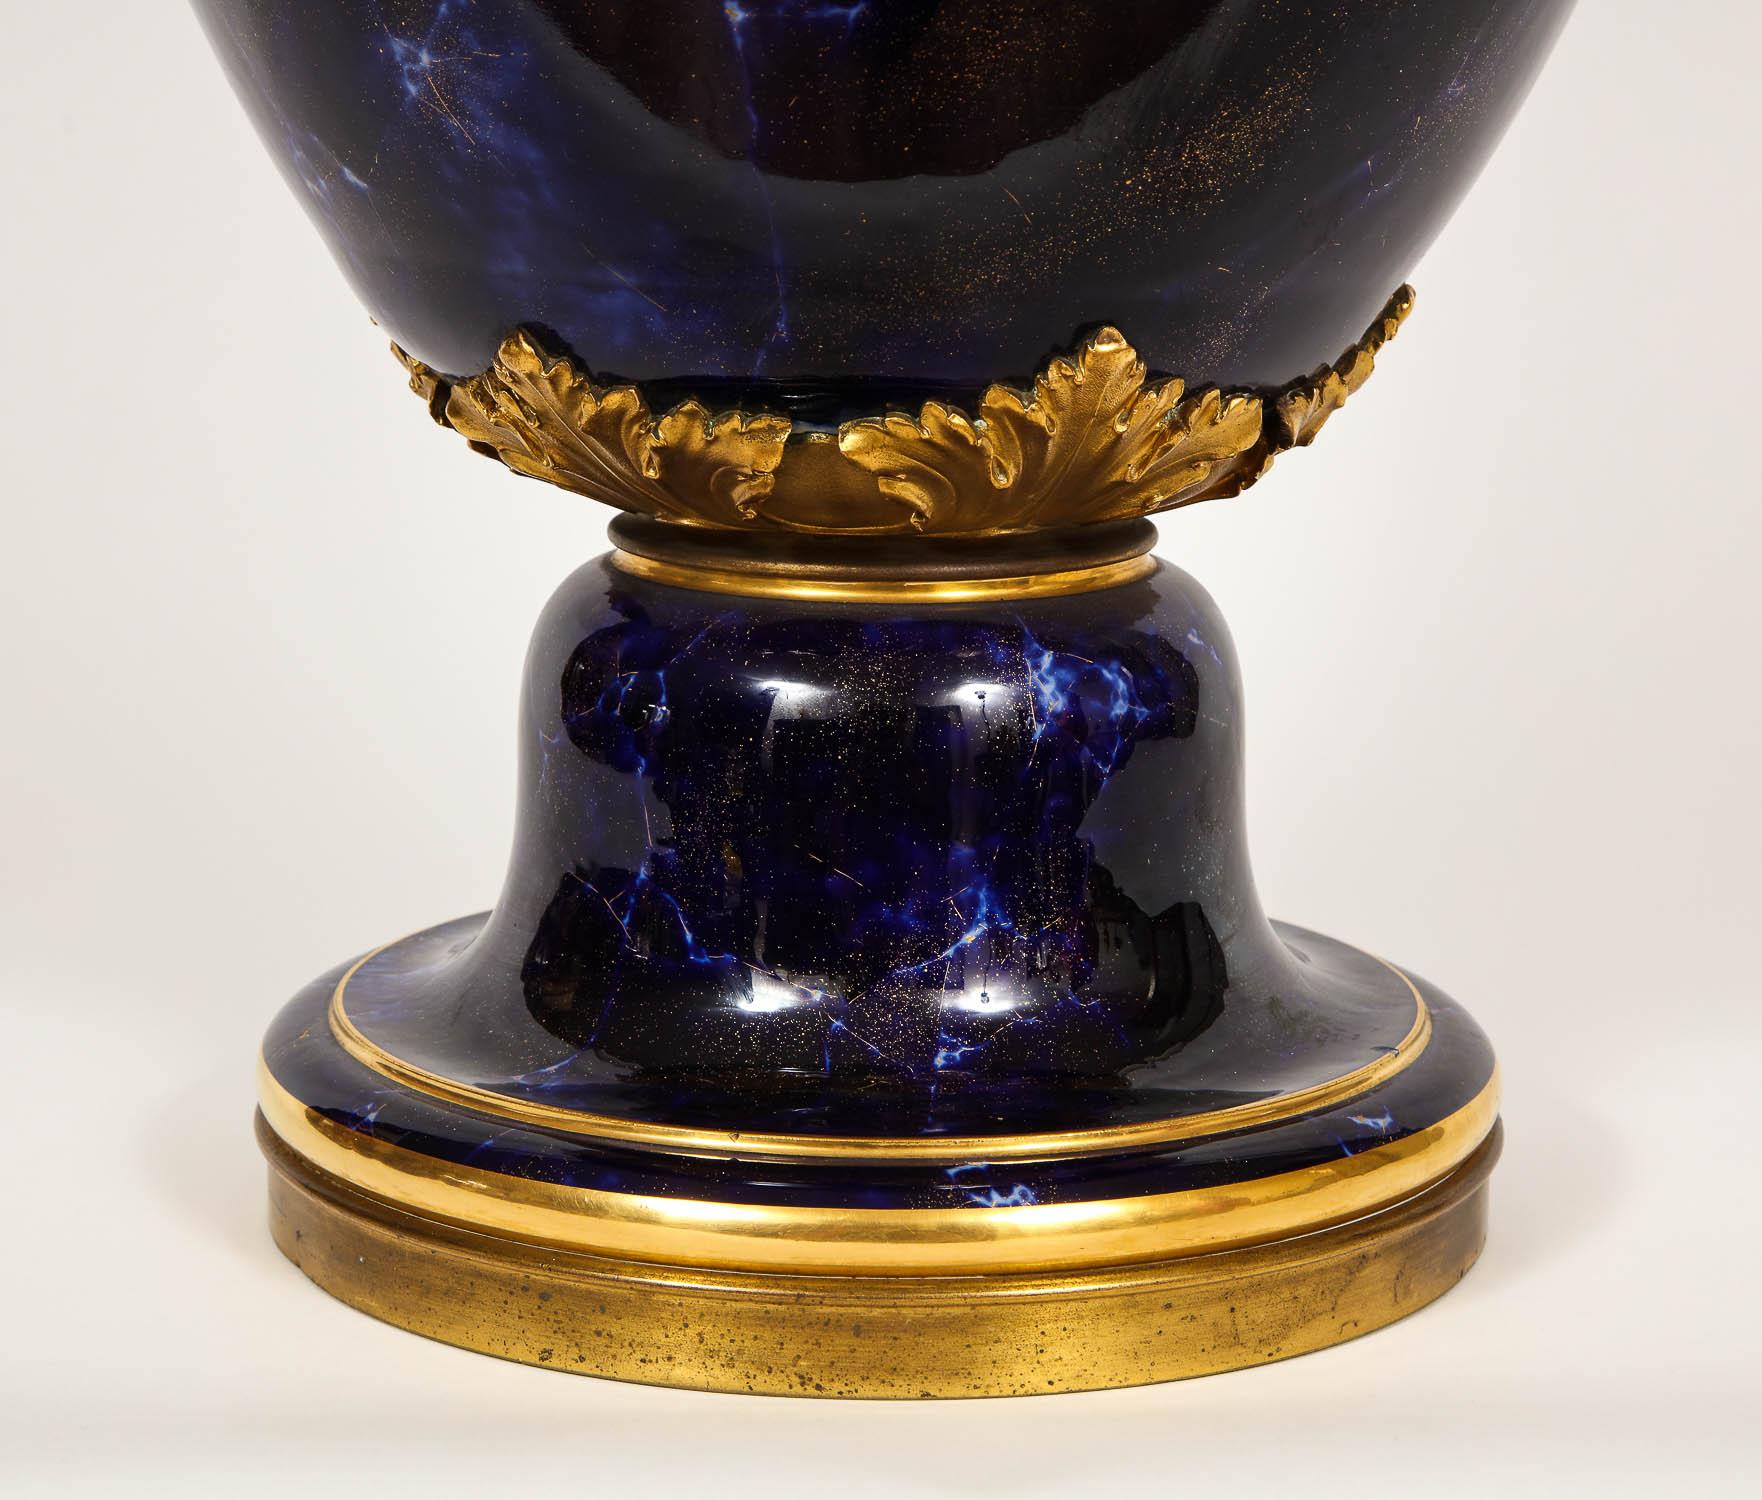 A monumental palace size Sèvres Porcelain blue lapis painted vase. Beautifully hand-painted to imitate natural Lapis Lazuli stone. Hand-painted in Royal Cobalt blue color with white veins and 24-karat speckled gold highlight. Mounted in doré bronze.